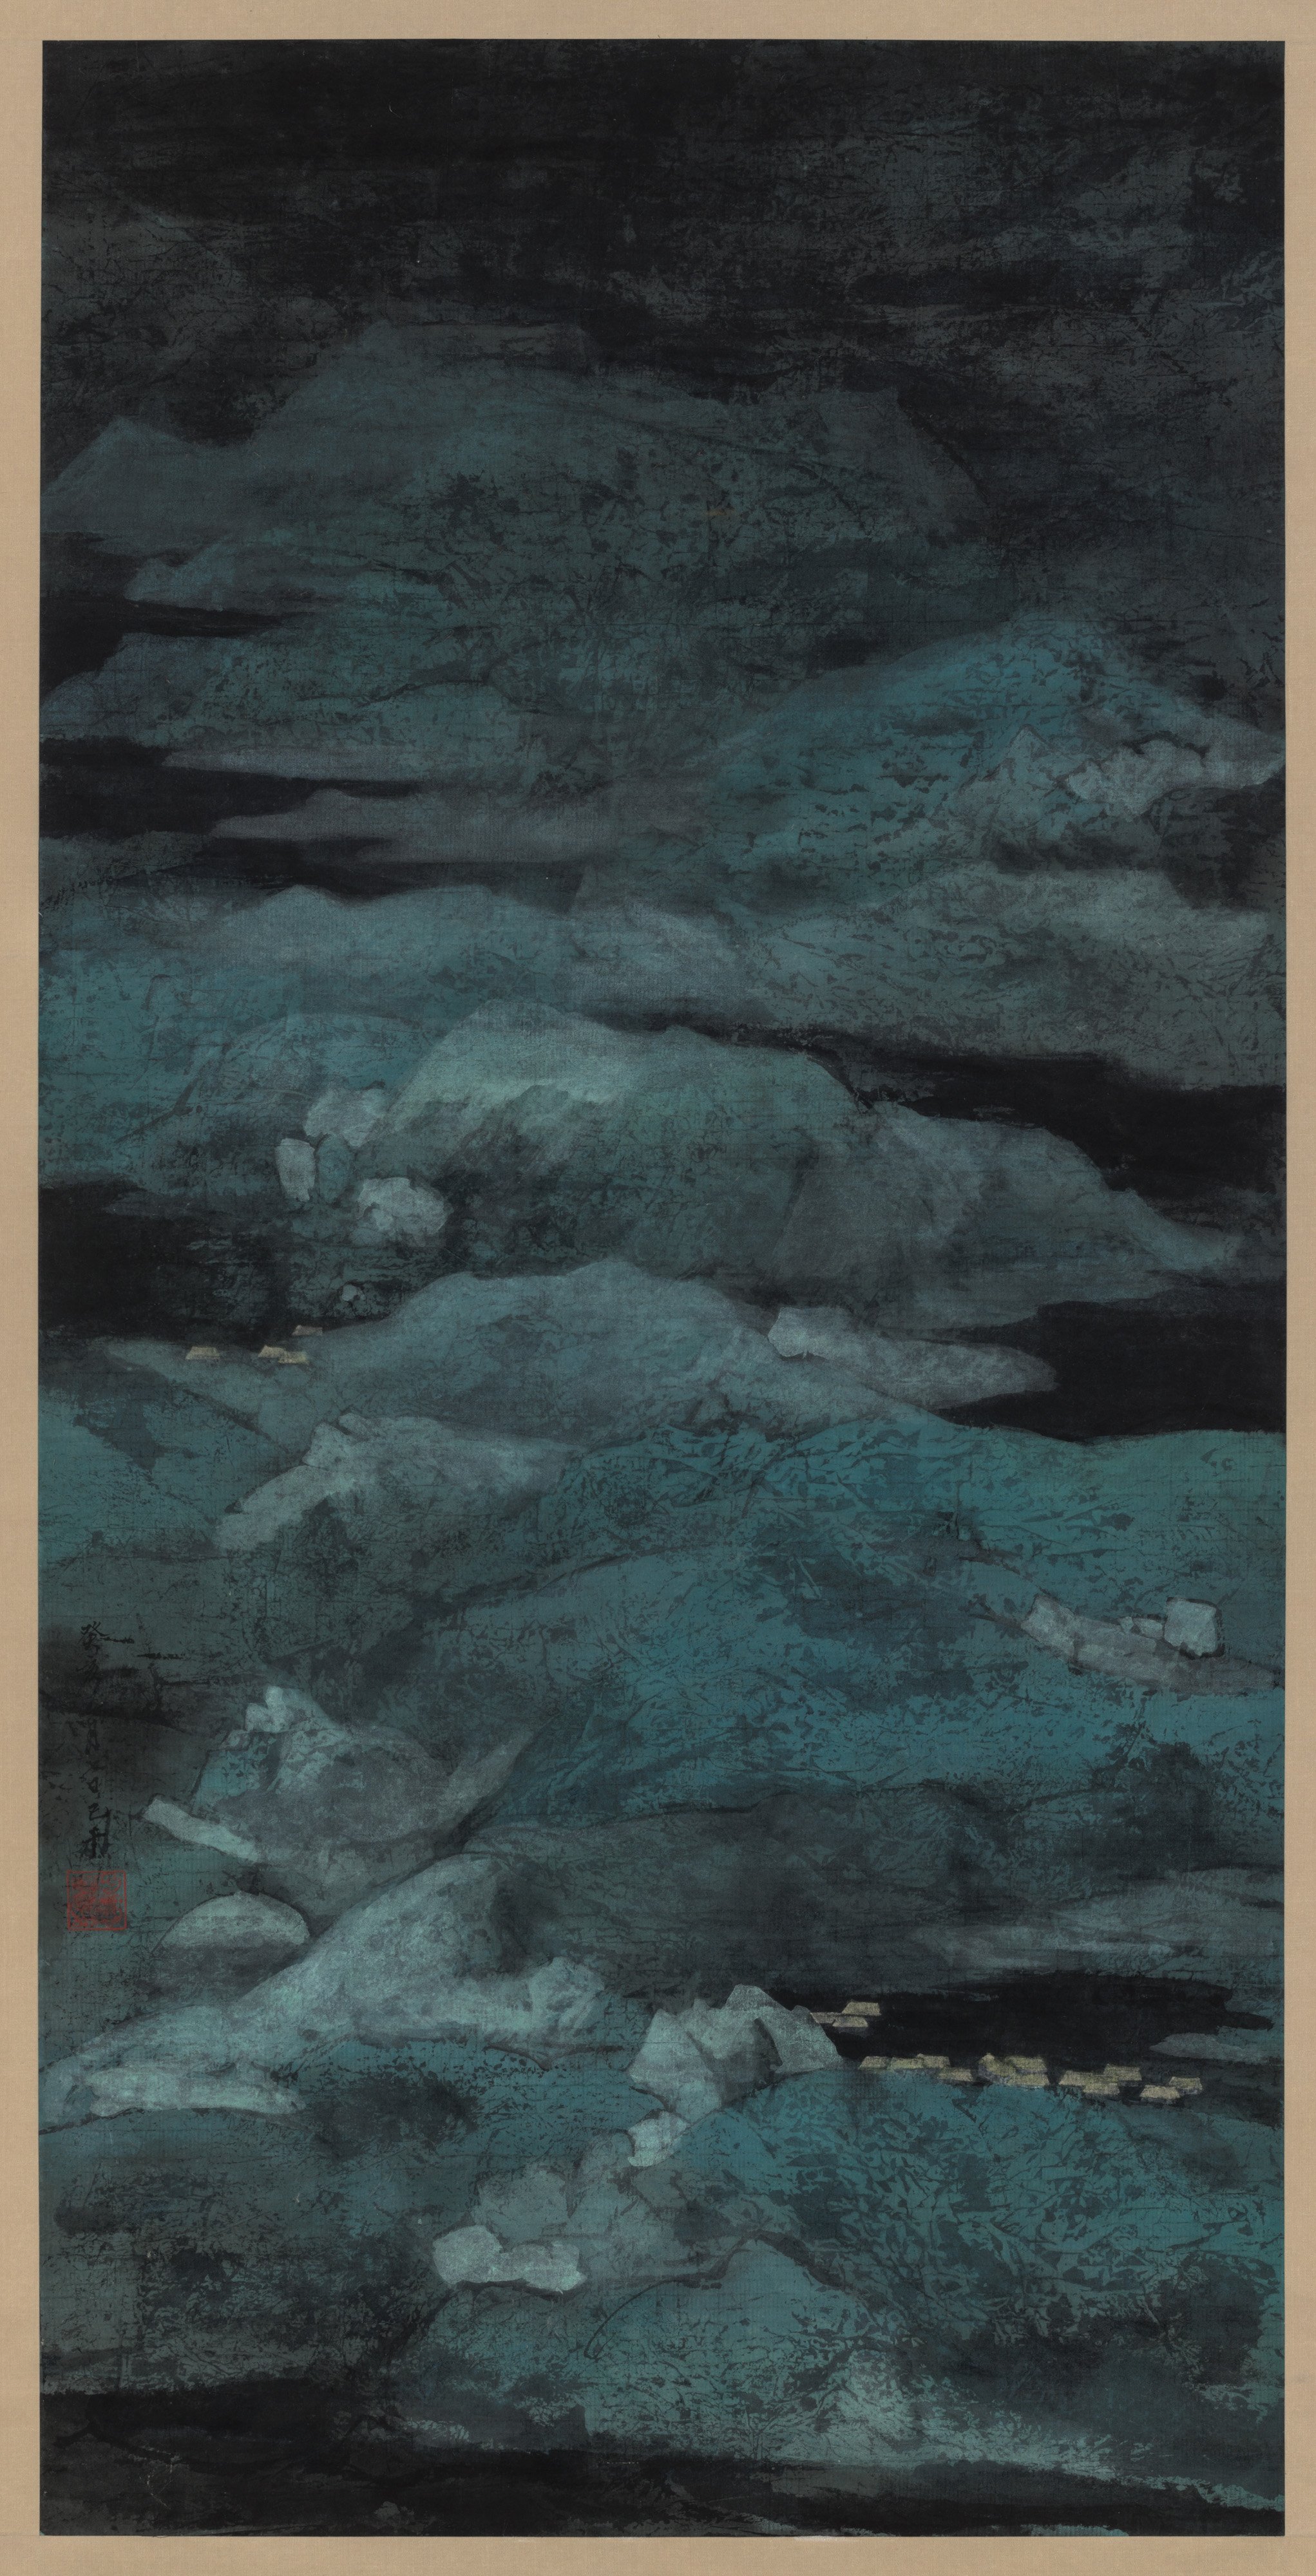  C. C. Wang,  Landscape No. 475 , 1983. Hanging scroll, ink and color on paper, 39 ⅞ x 20 inches (101.3 x 50.8 cm). Private Collection, New York. Image copyright the Estate of C.C. Wang. Photo: Stan Narten. 